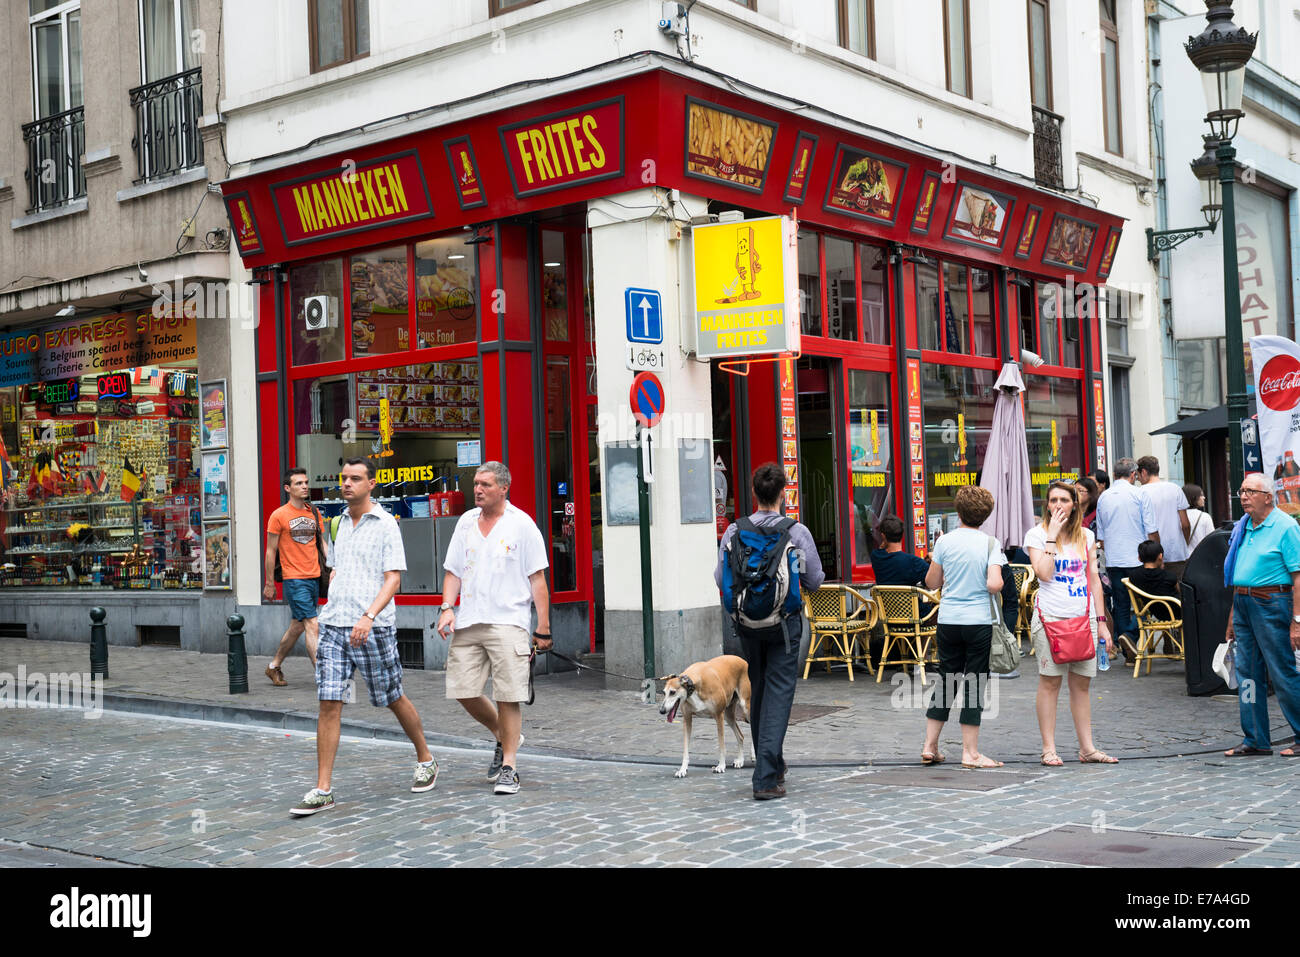 A Frites shop / restaurant in the center of Brussels. Stock Photo